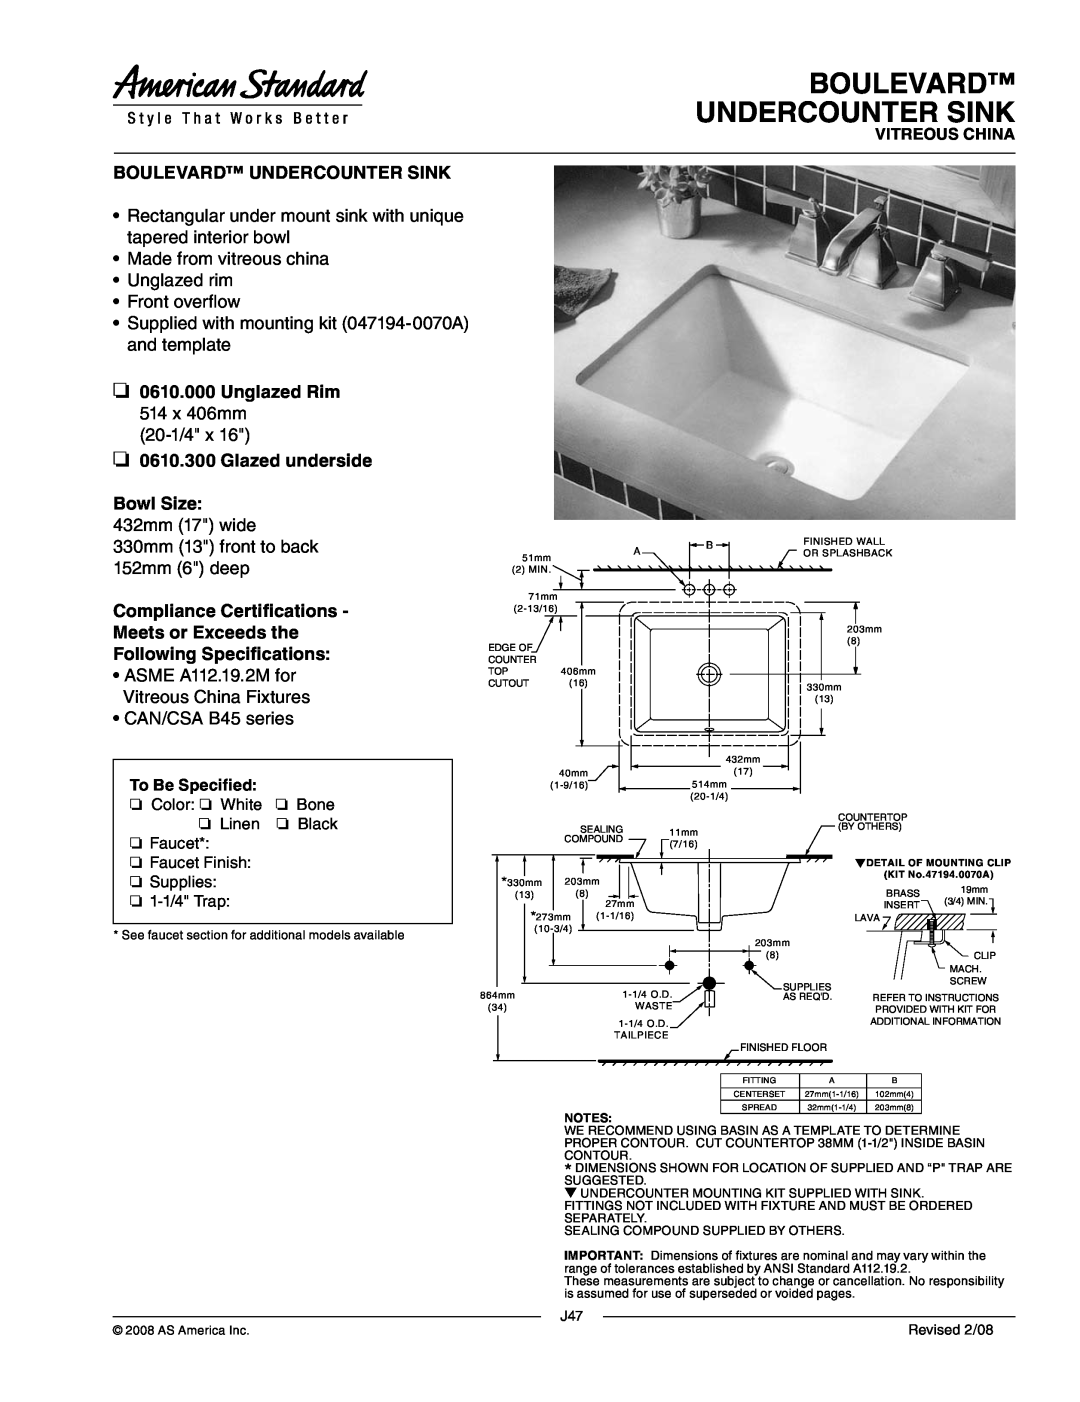 American Standard 0610.300 dimensions Boulevard Undercounter Sink, Made from vitreous china Unglazed rim, Front overflow 